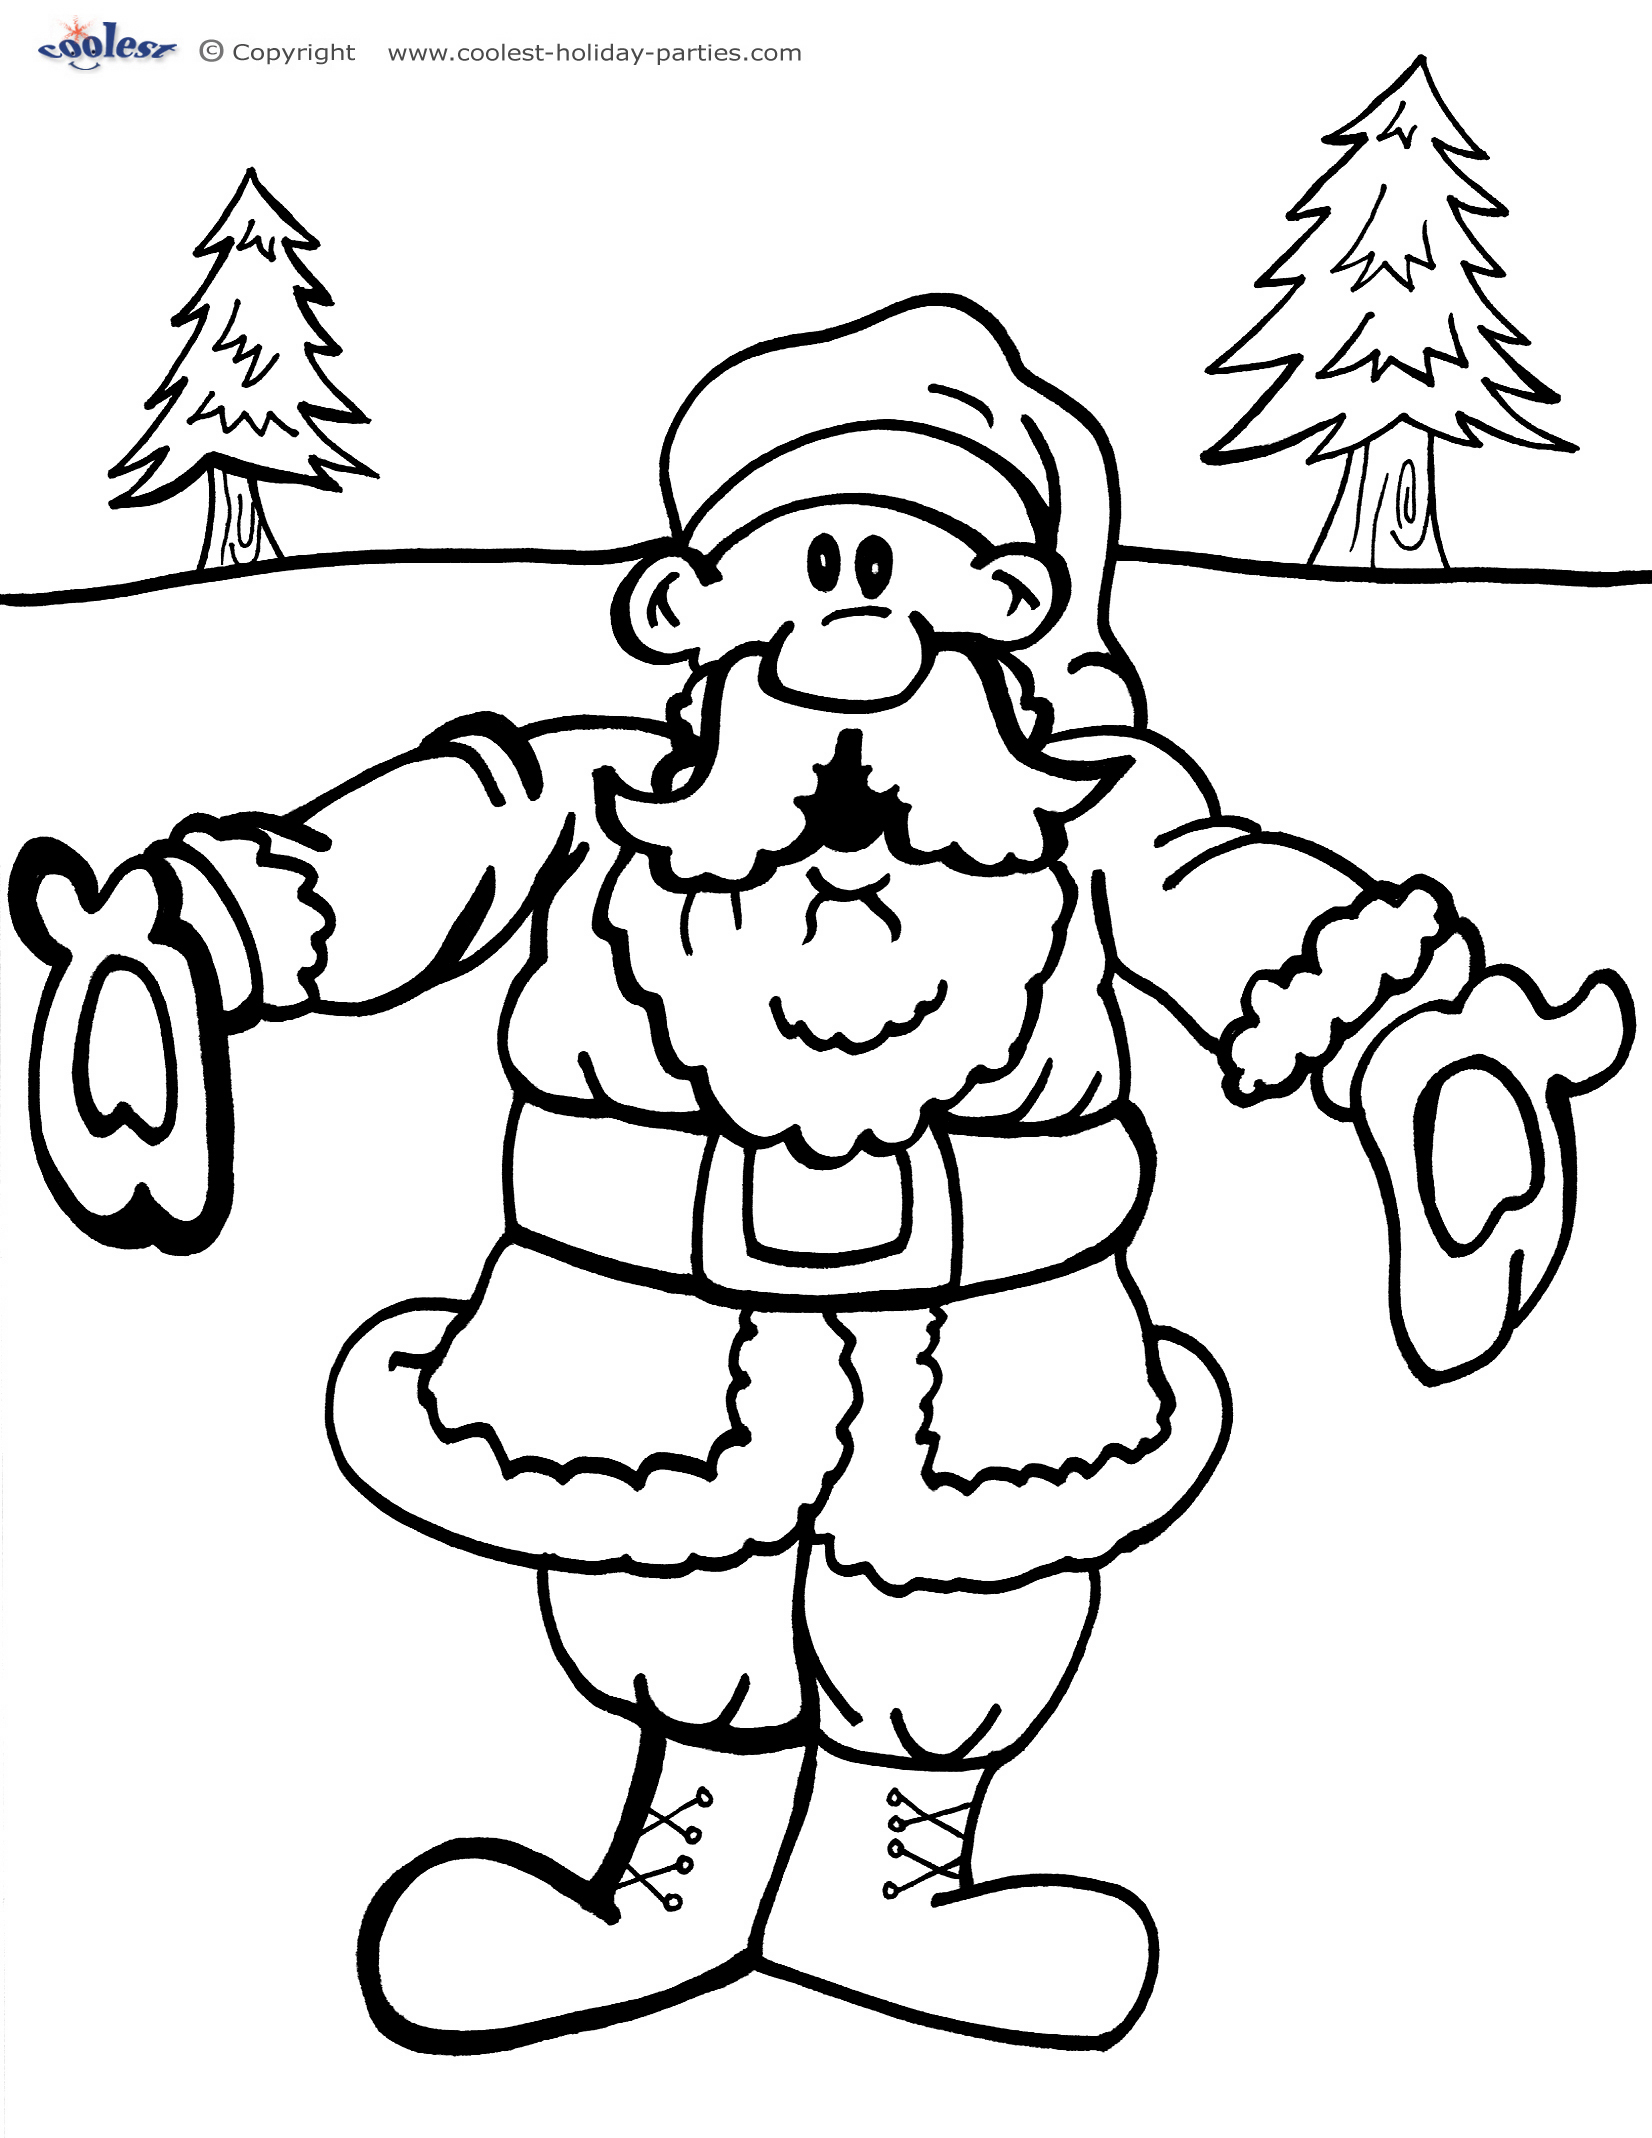 Printable Christmas Coloring Page 11 - Coolest Free Printables